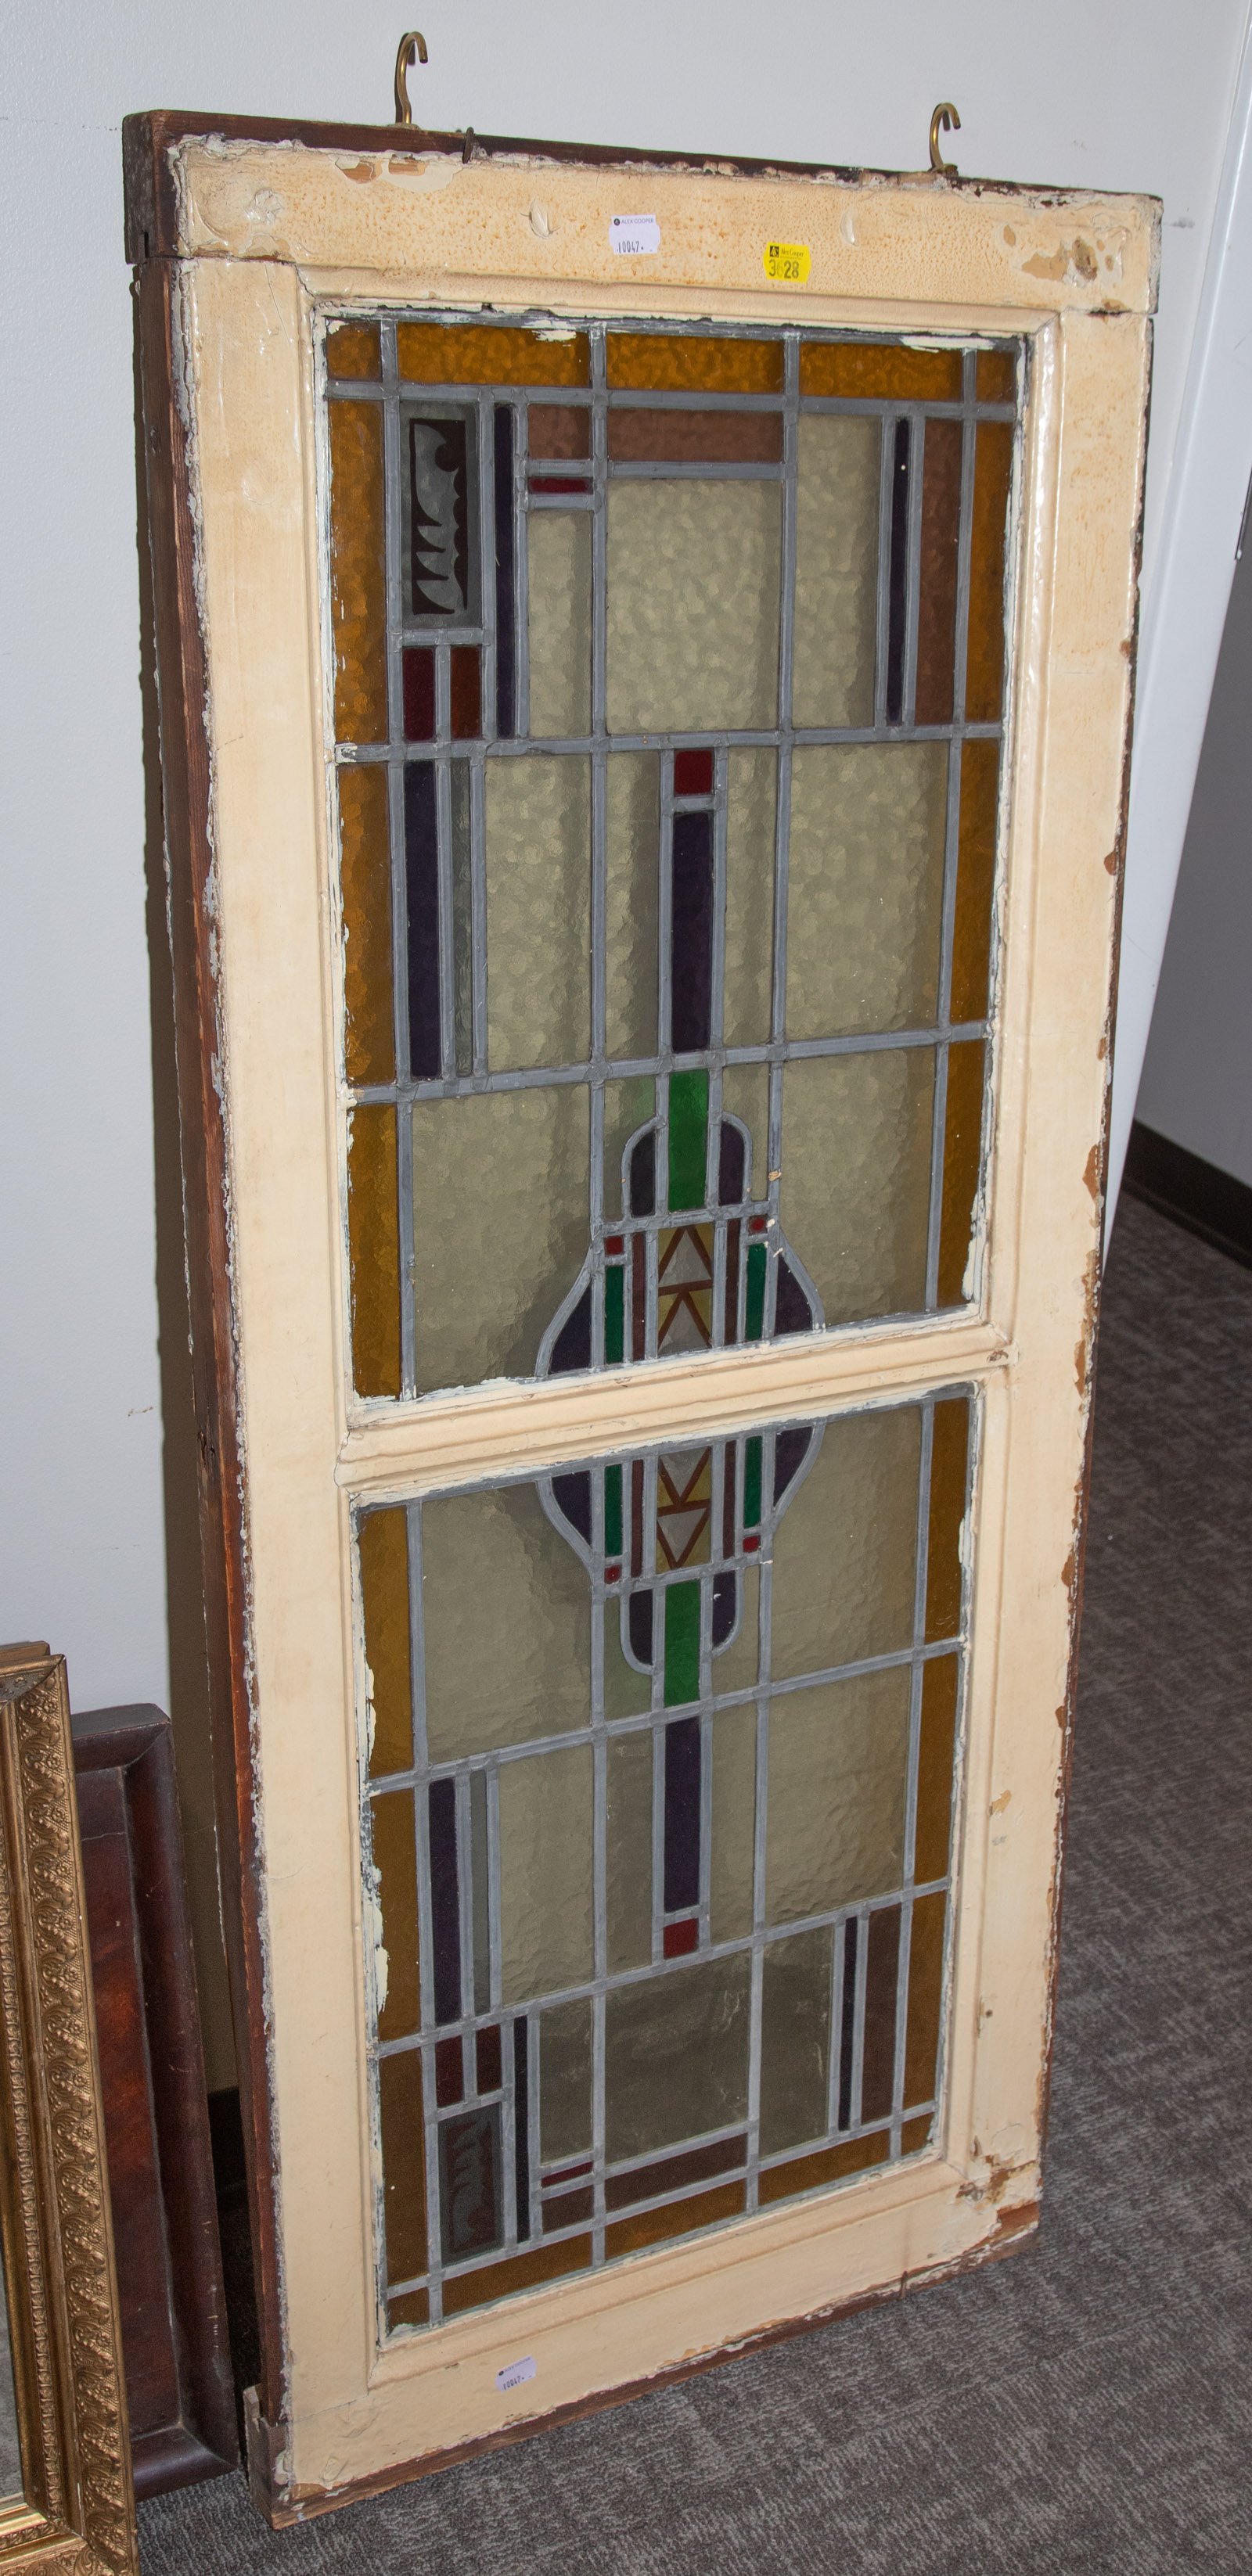 ART DECO STYLE LEADED STAINED GLASS 3356d0